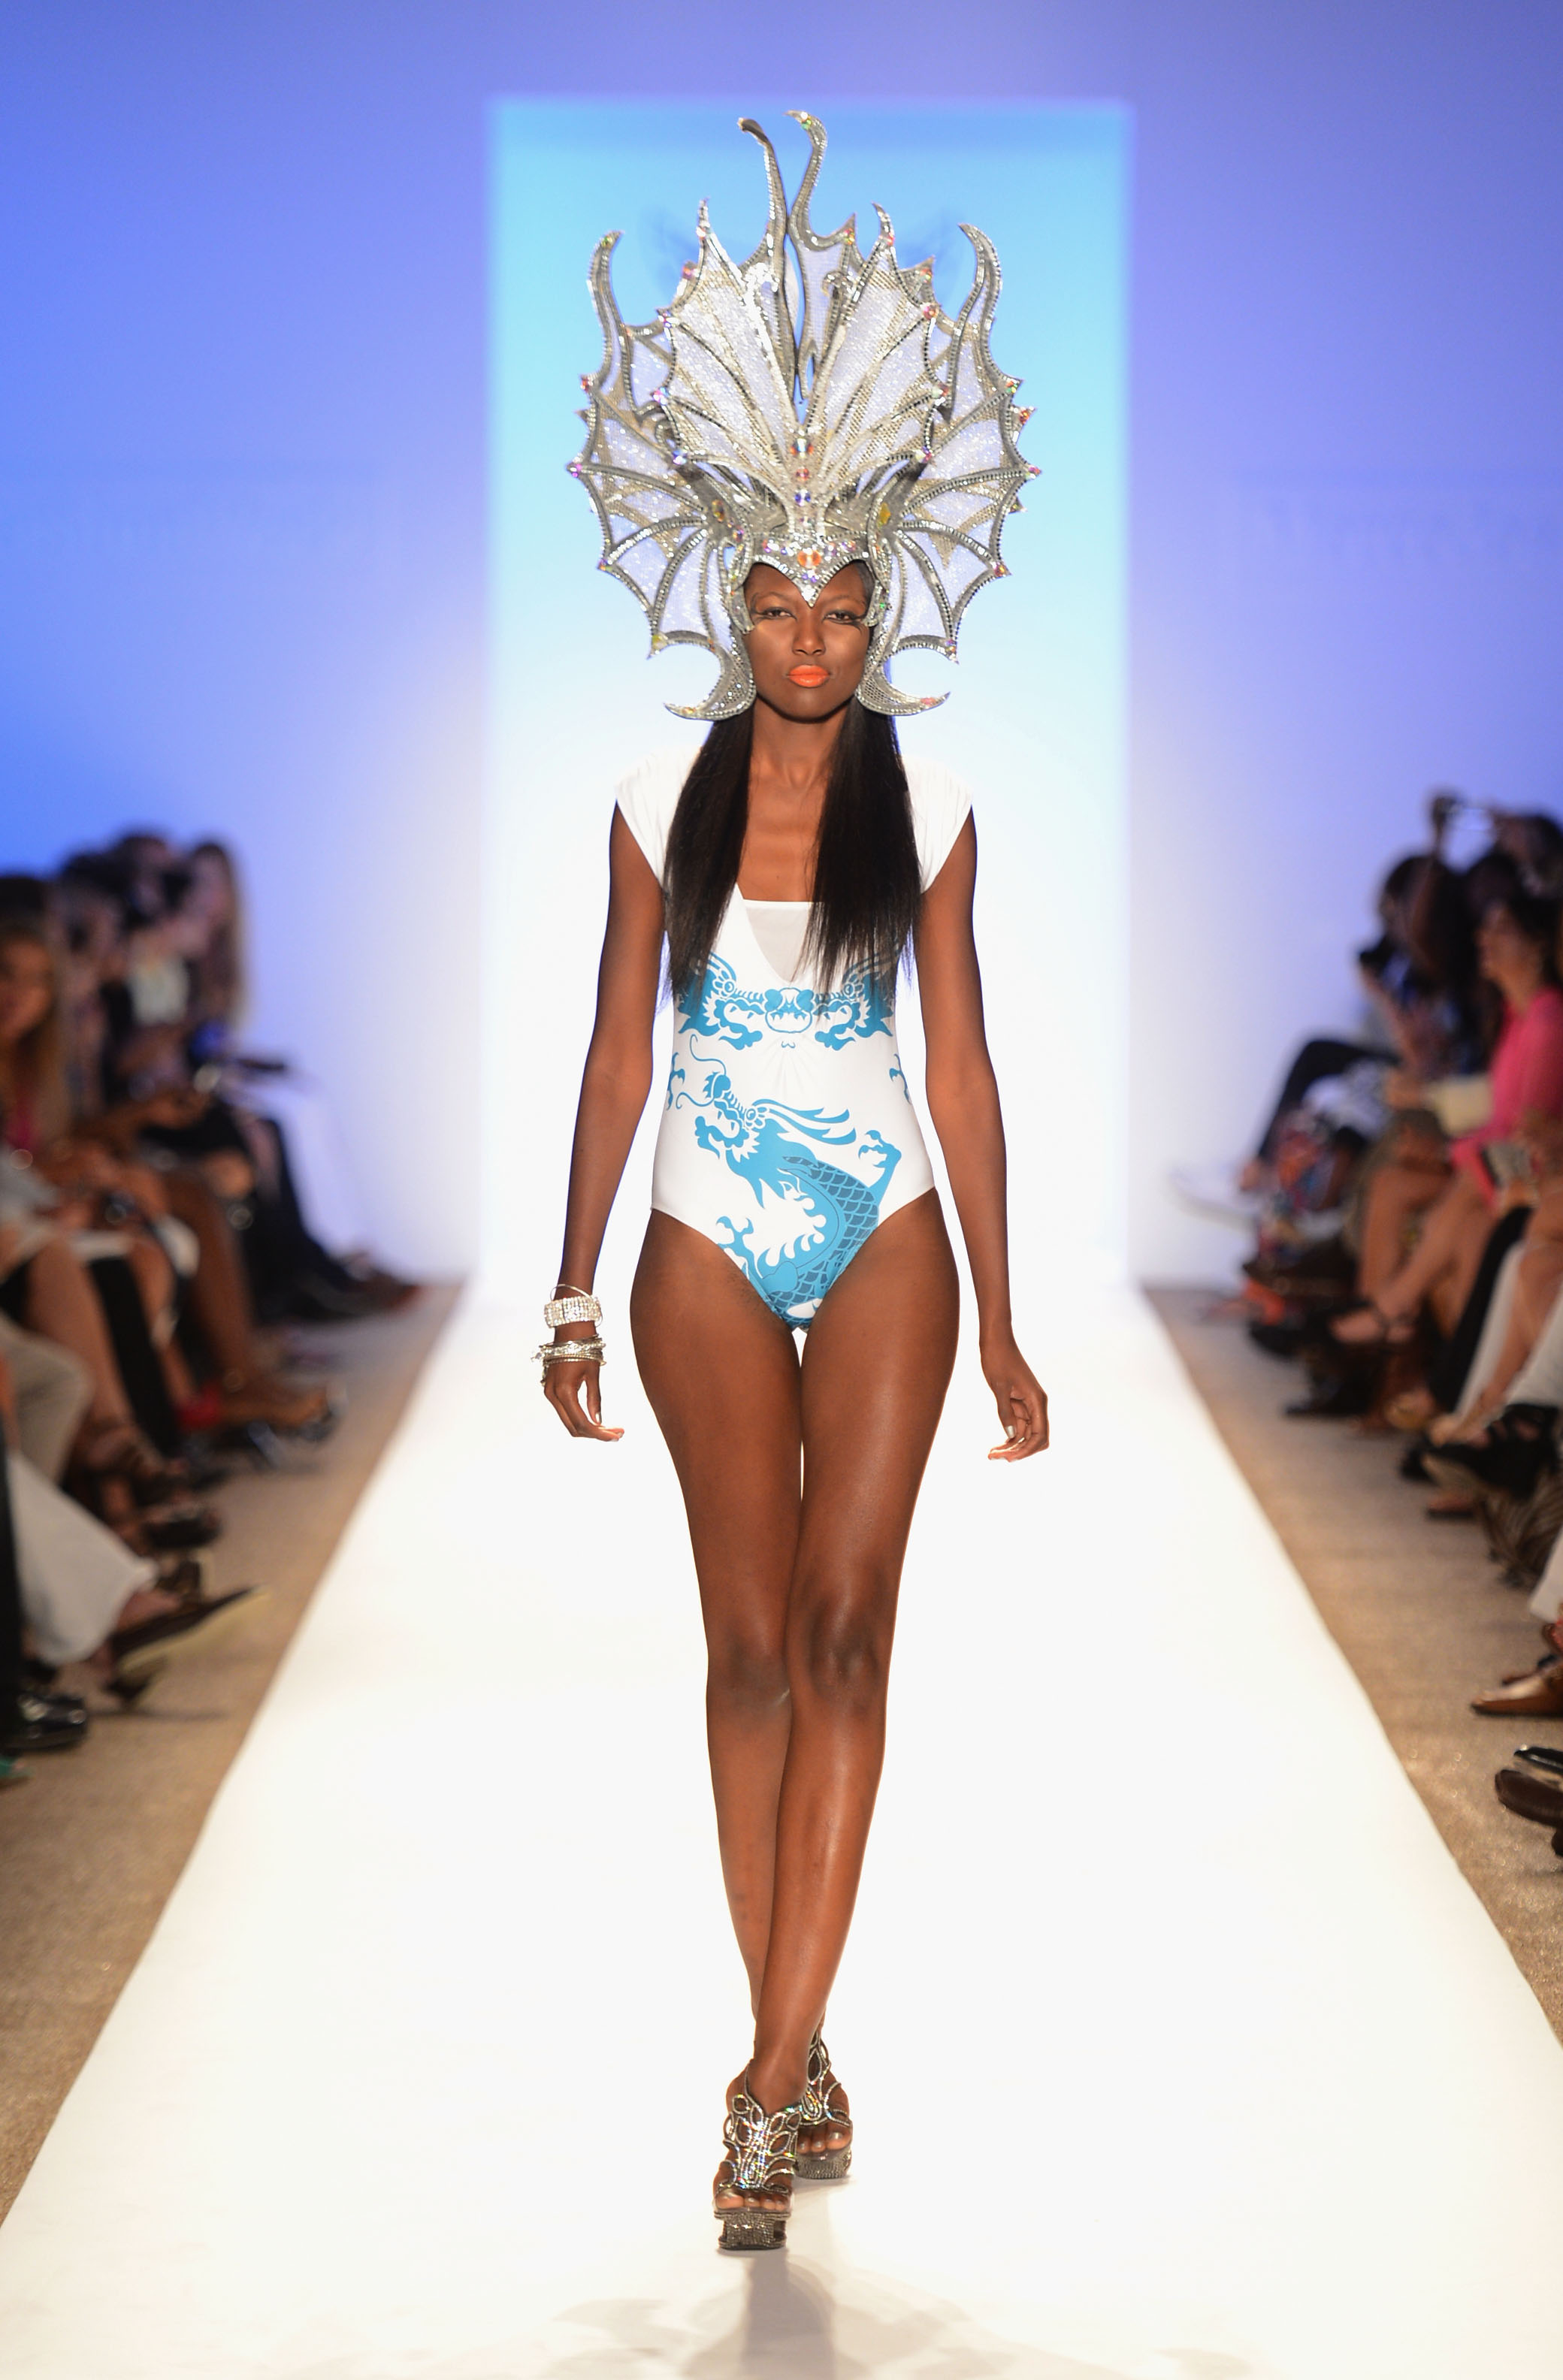 Mercedes-Benz Fashion Week Swim 2013 Official Coverage - Runway Day 1